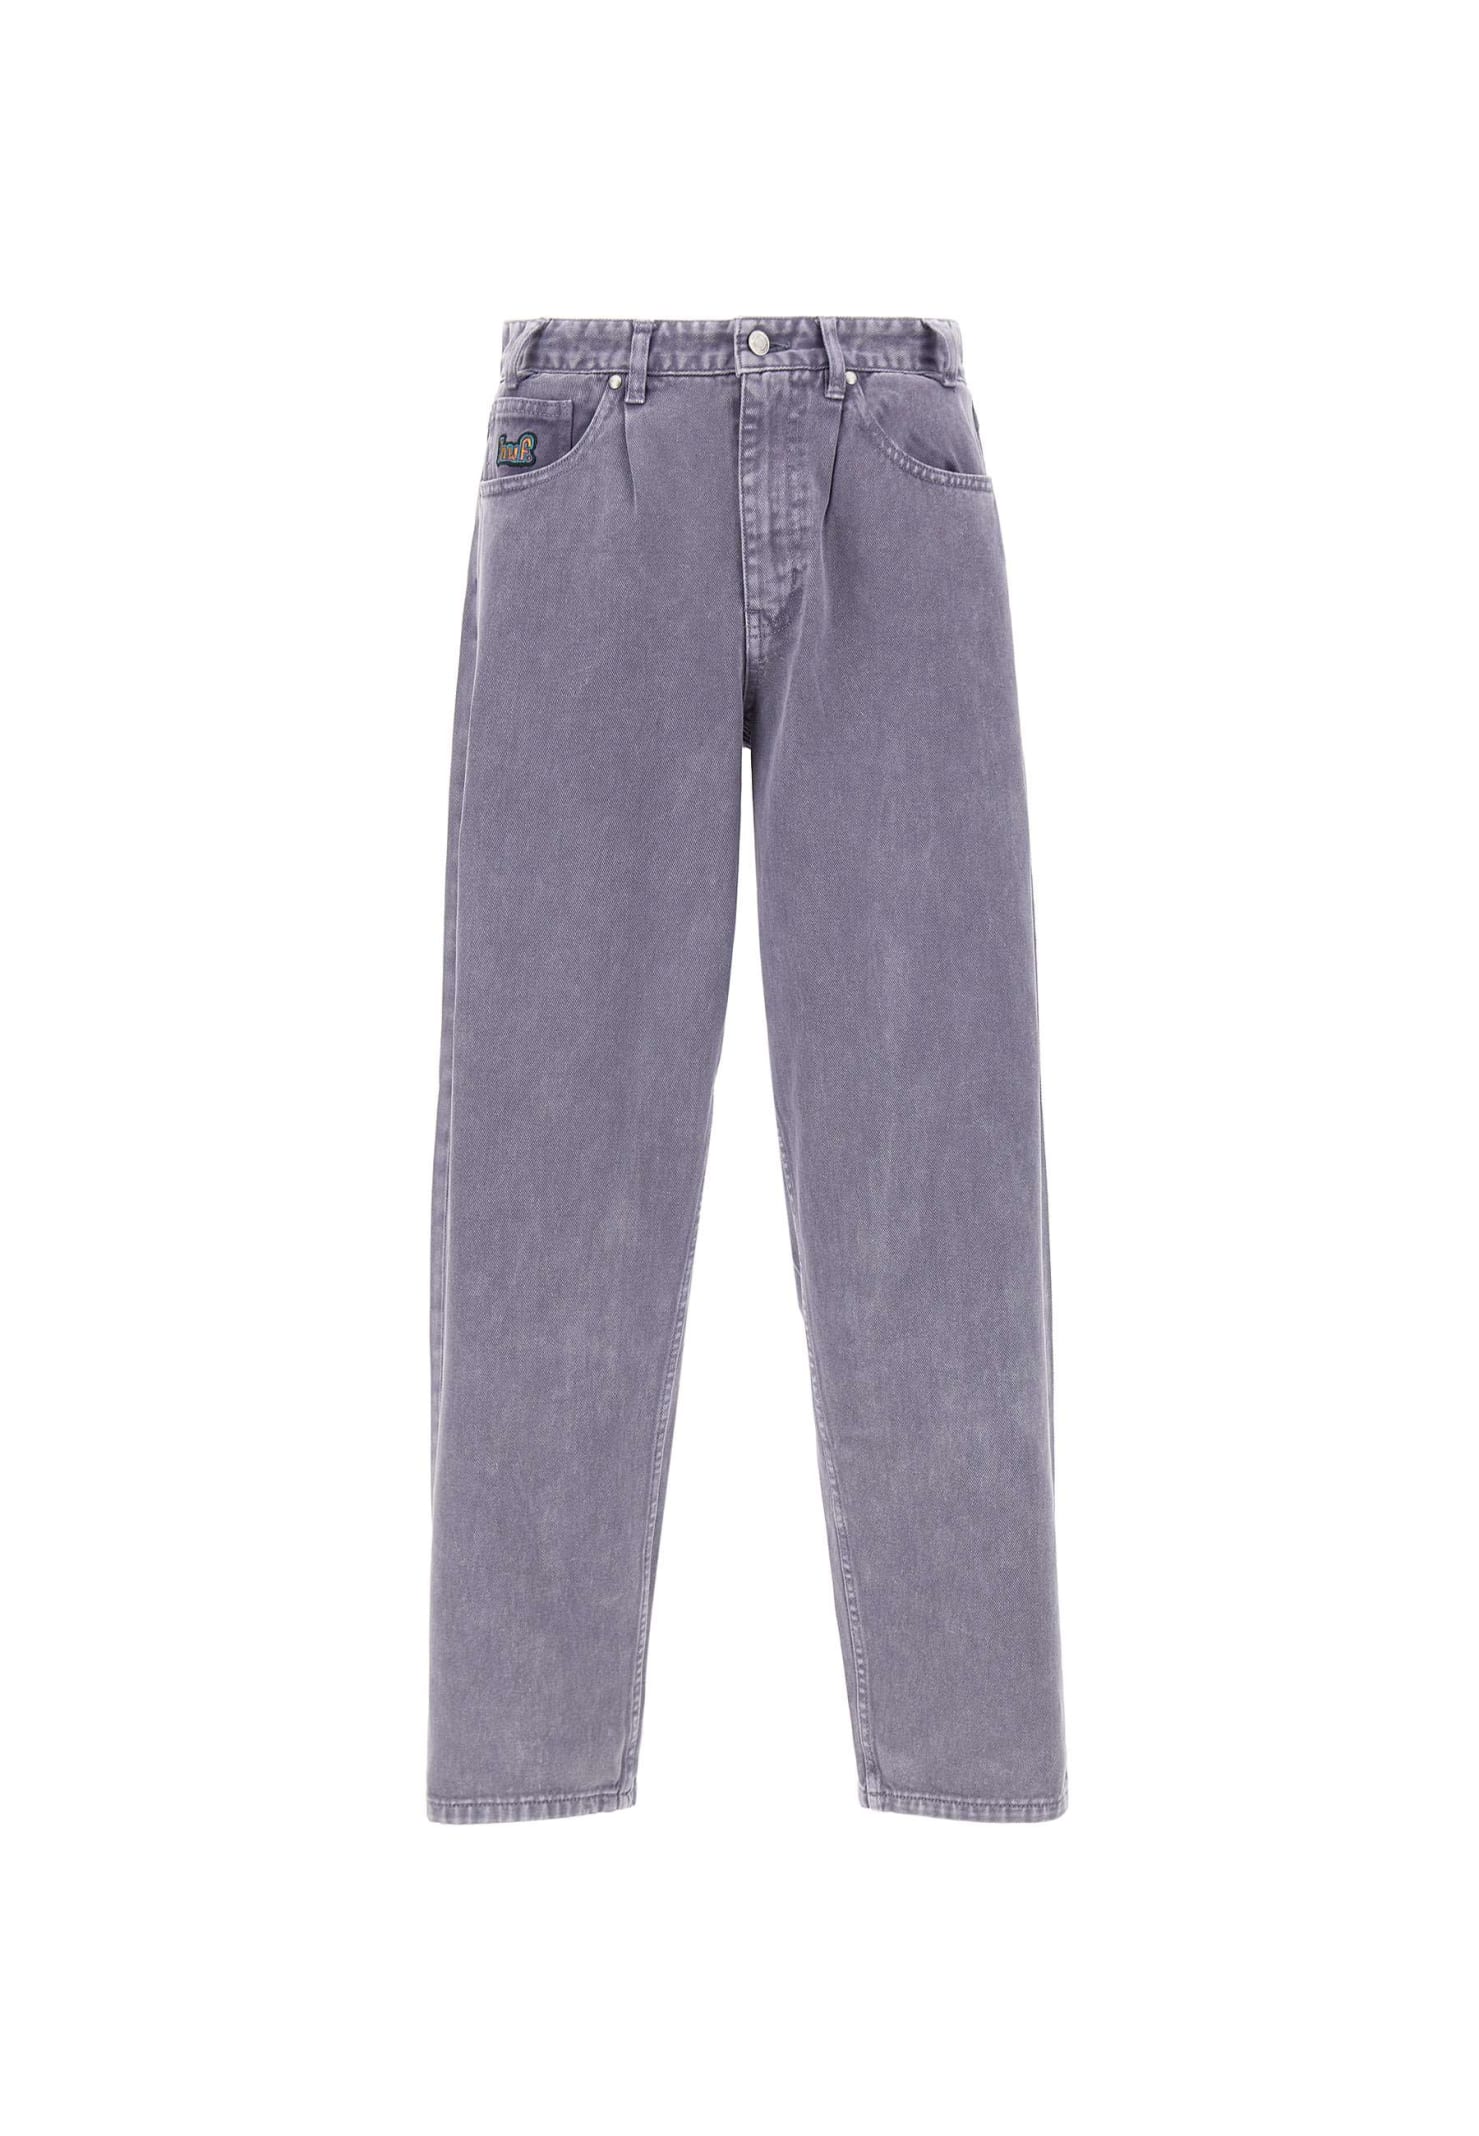 cromer Washed Pant Jeans